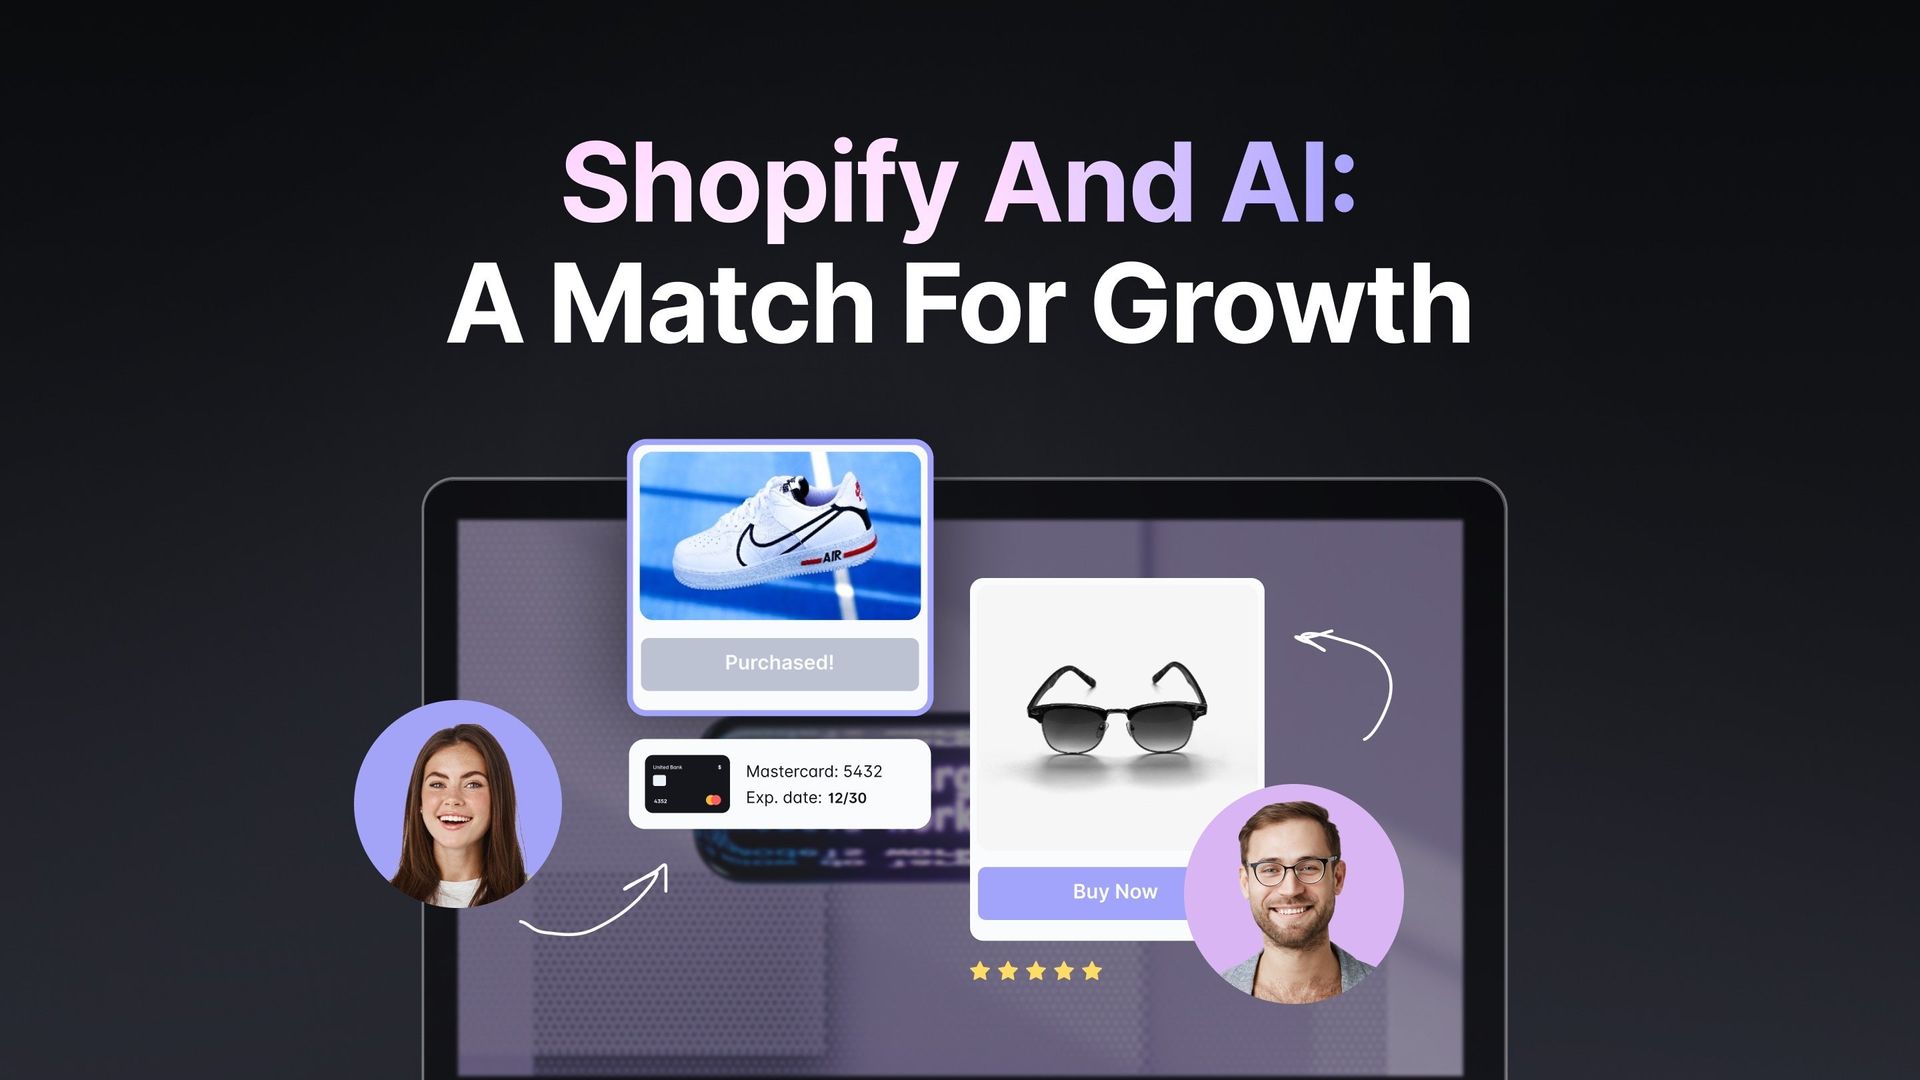 Picture for A Practical Guide to Integrating AI into Your Shopify Store article